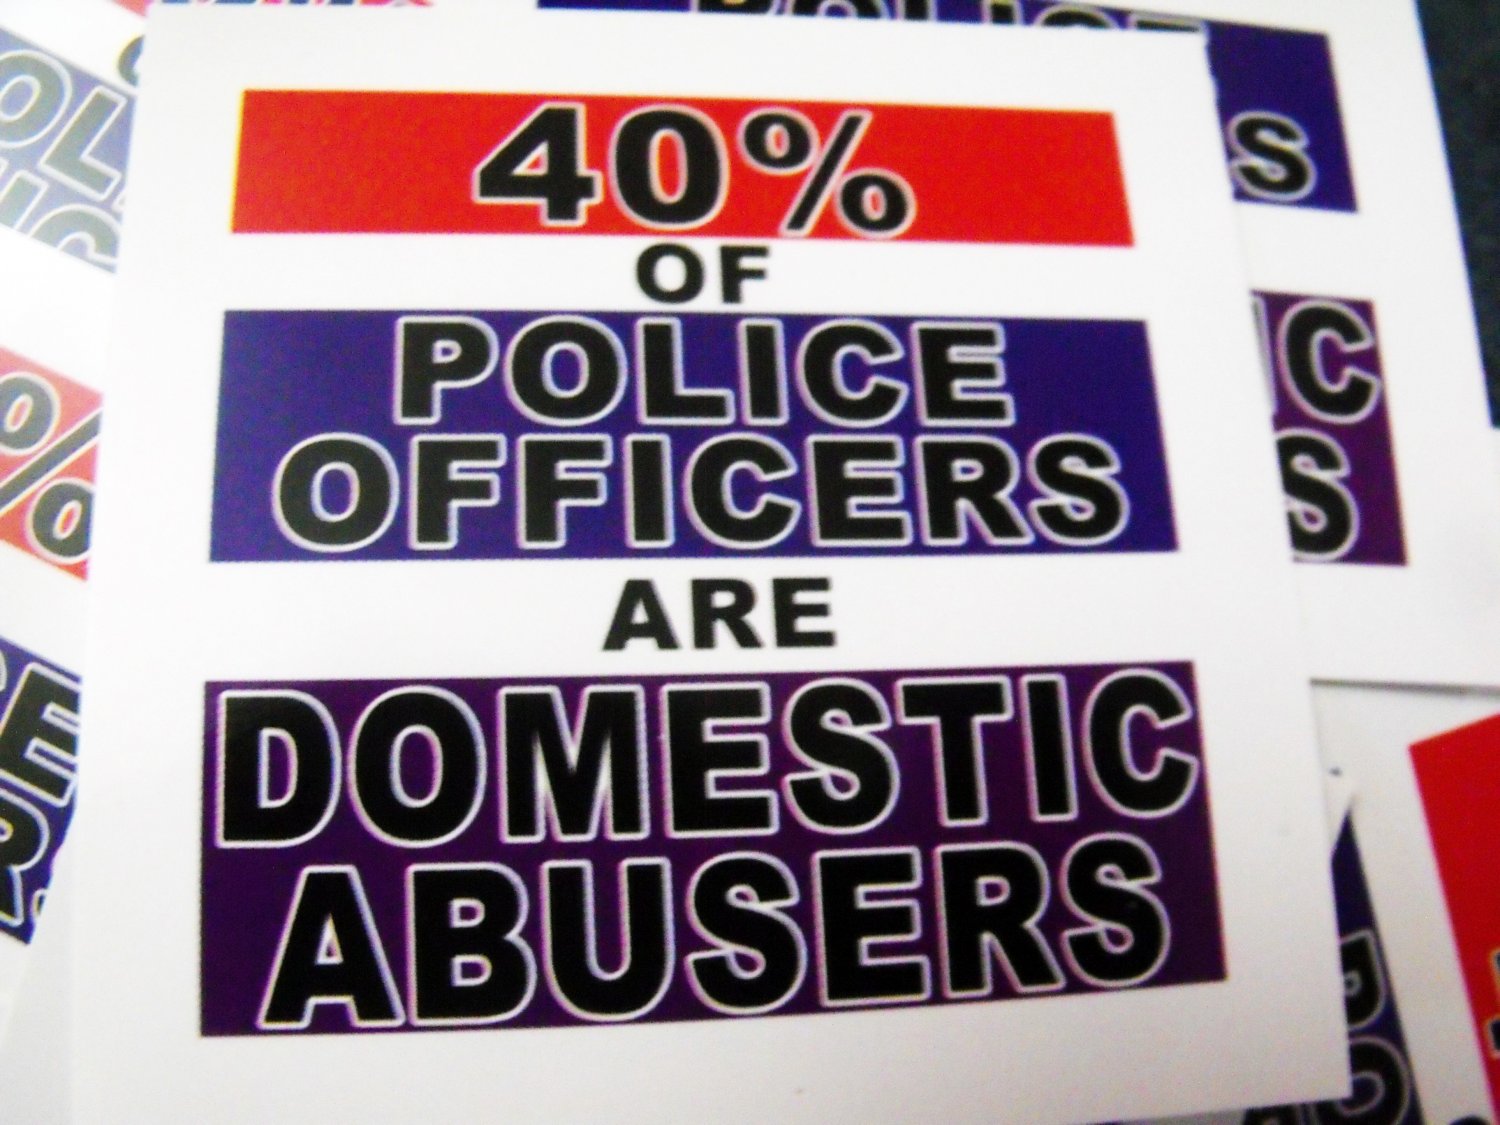 100 40% OF POLICE OFFICERS ARE DOMESTIC ABUSERS 2.5" x 2.5"  stickers